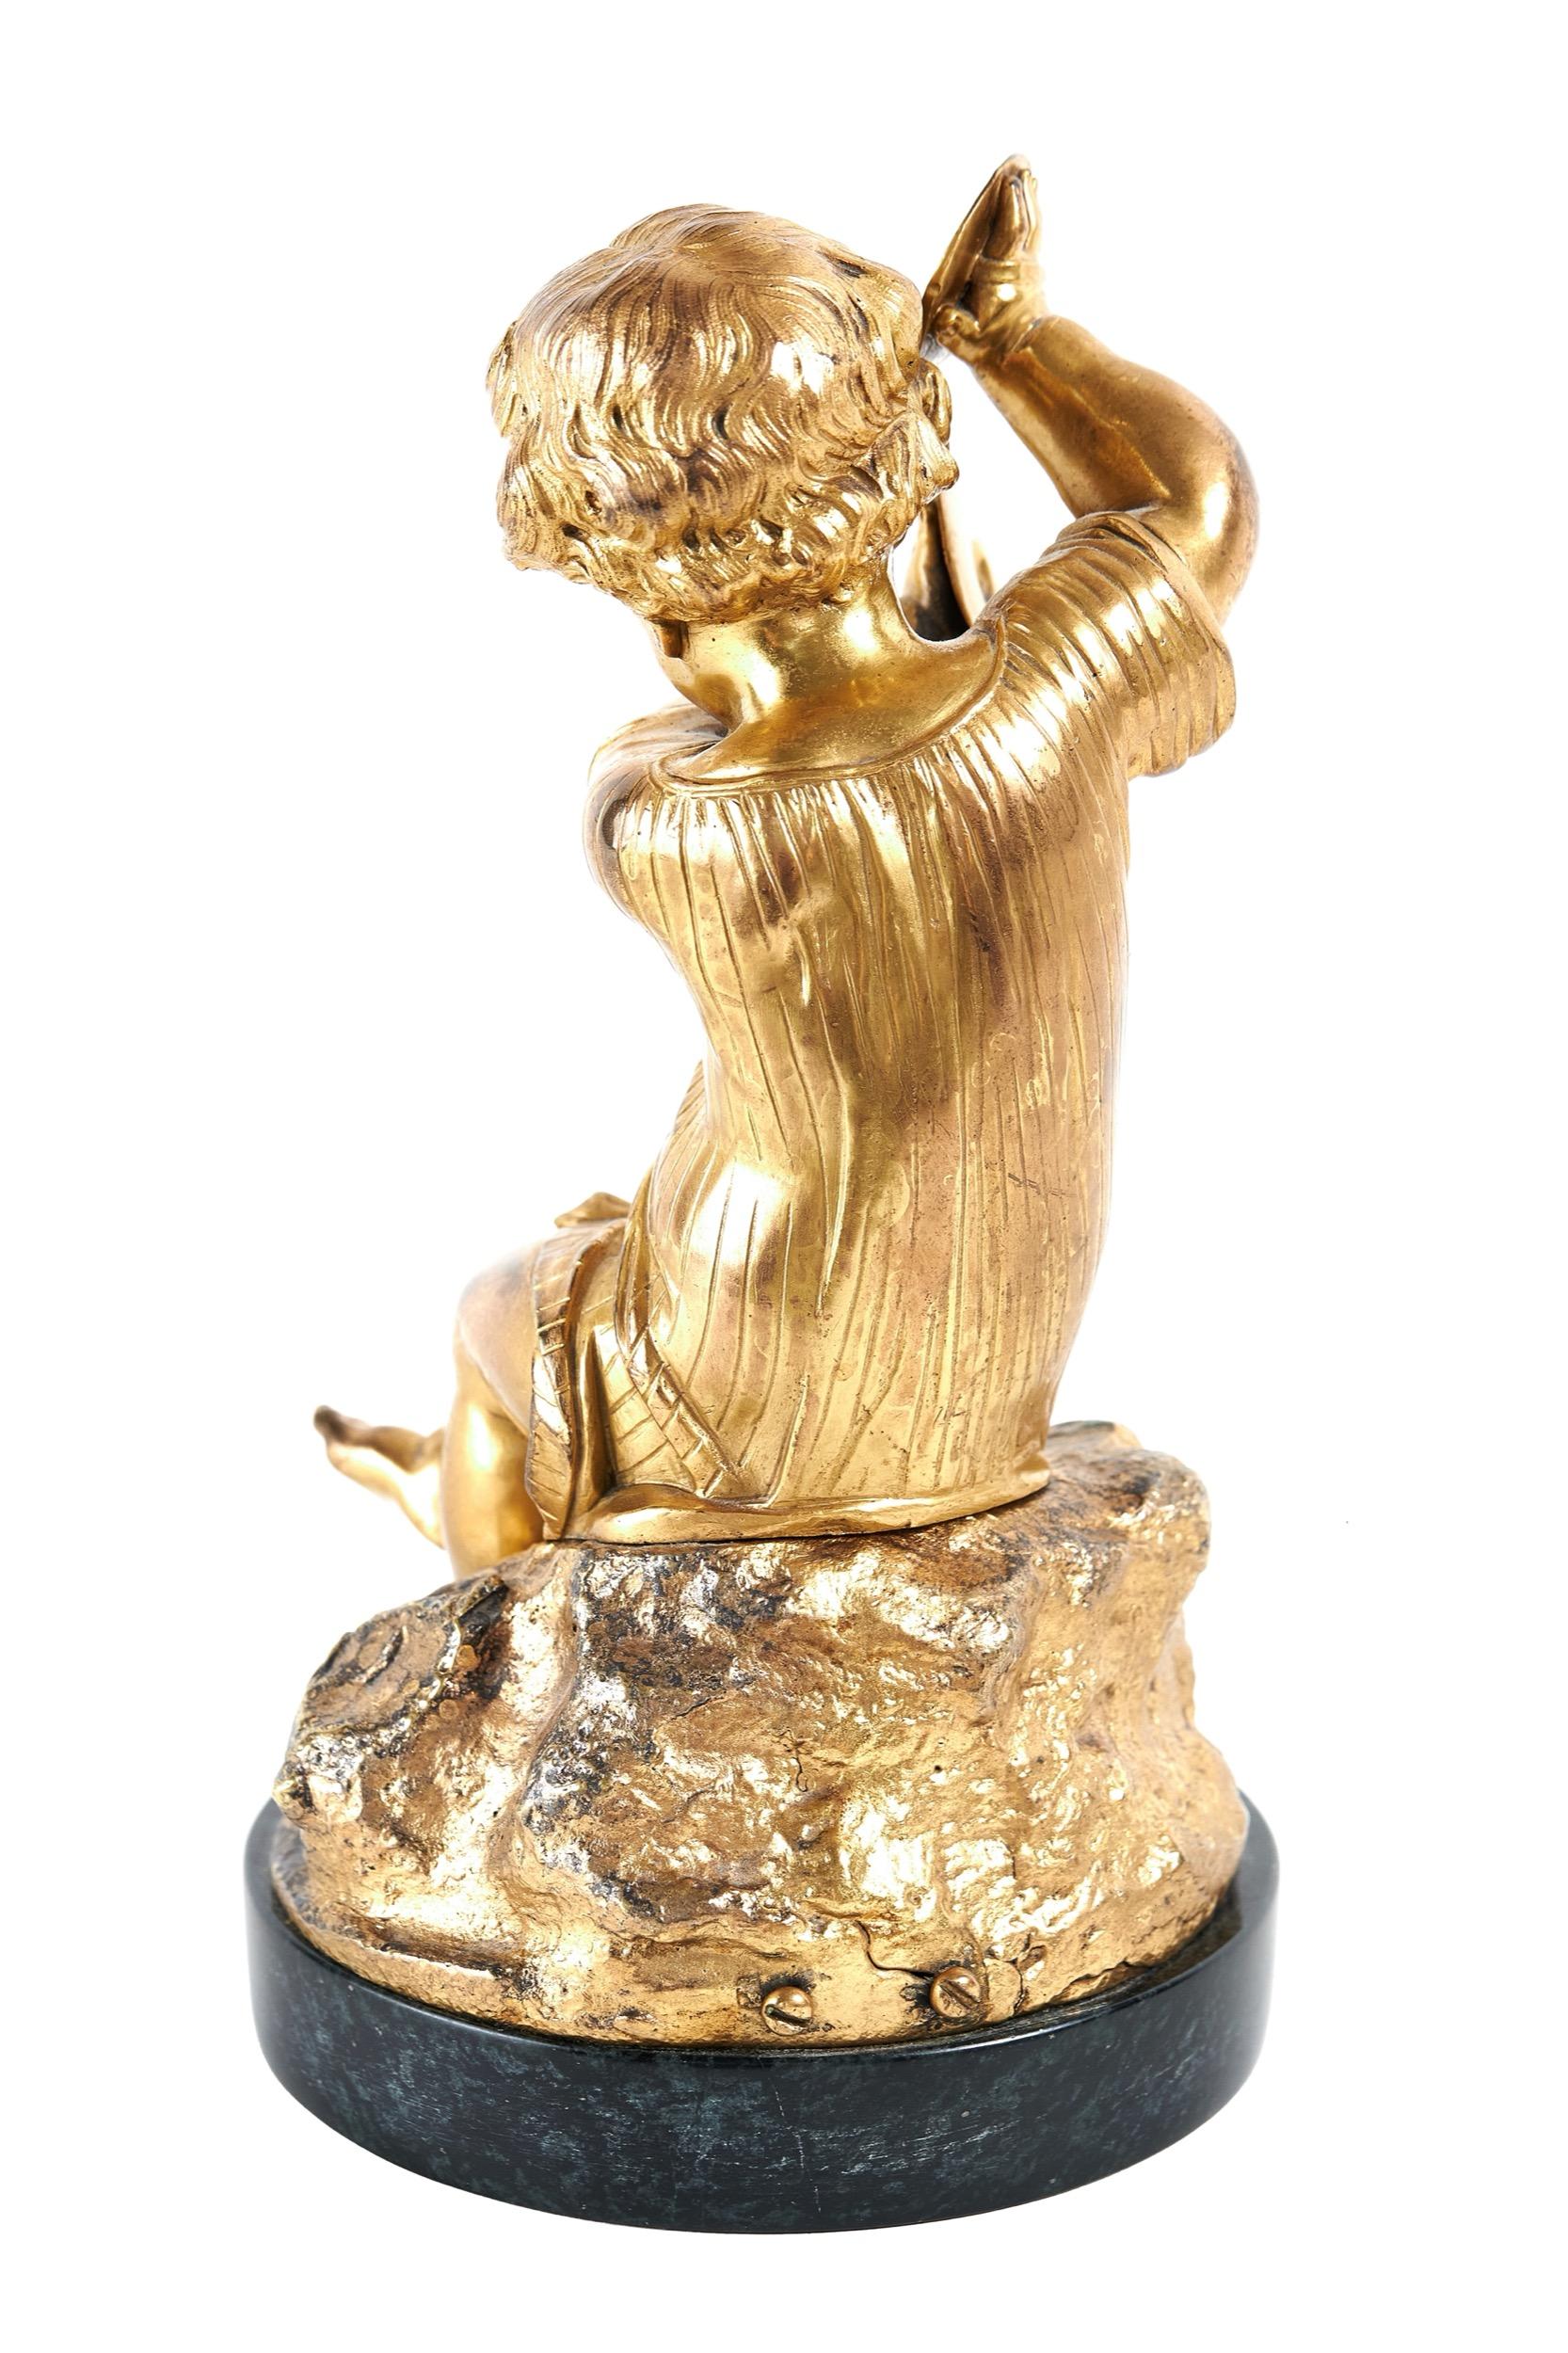 Victorian Gilt Bronze figure of  a Child playing the Cymbals
Sitting Cross leg on a rock, 
fine detailed casting, on the face, 
Hands with the cymbal band wrapped around, 
Stripes on clothing
Muscle detail on arms & legs, 
Fine toes & toe nails,